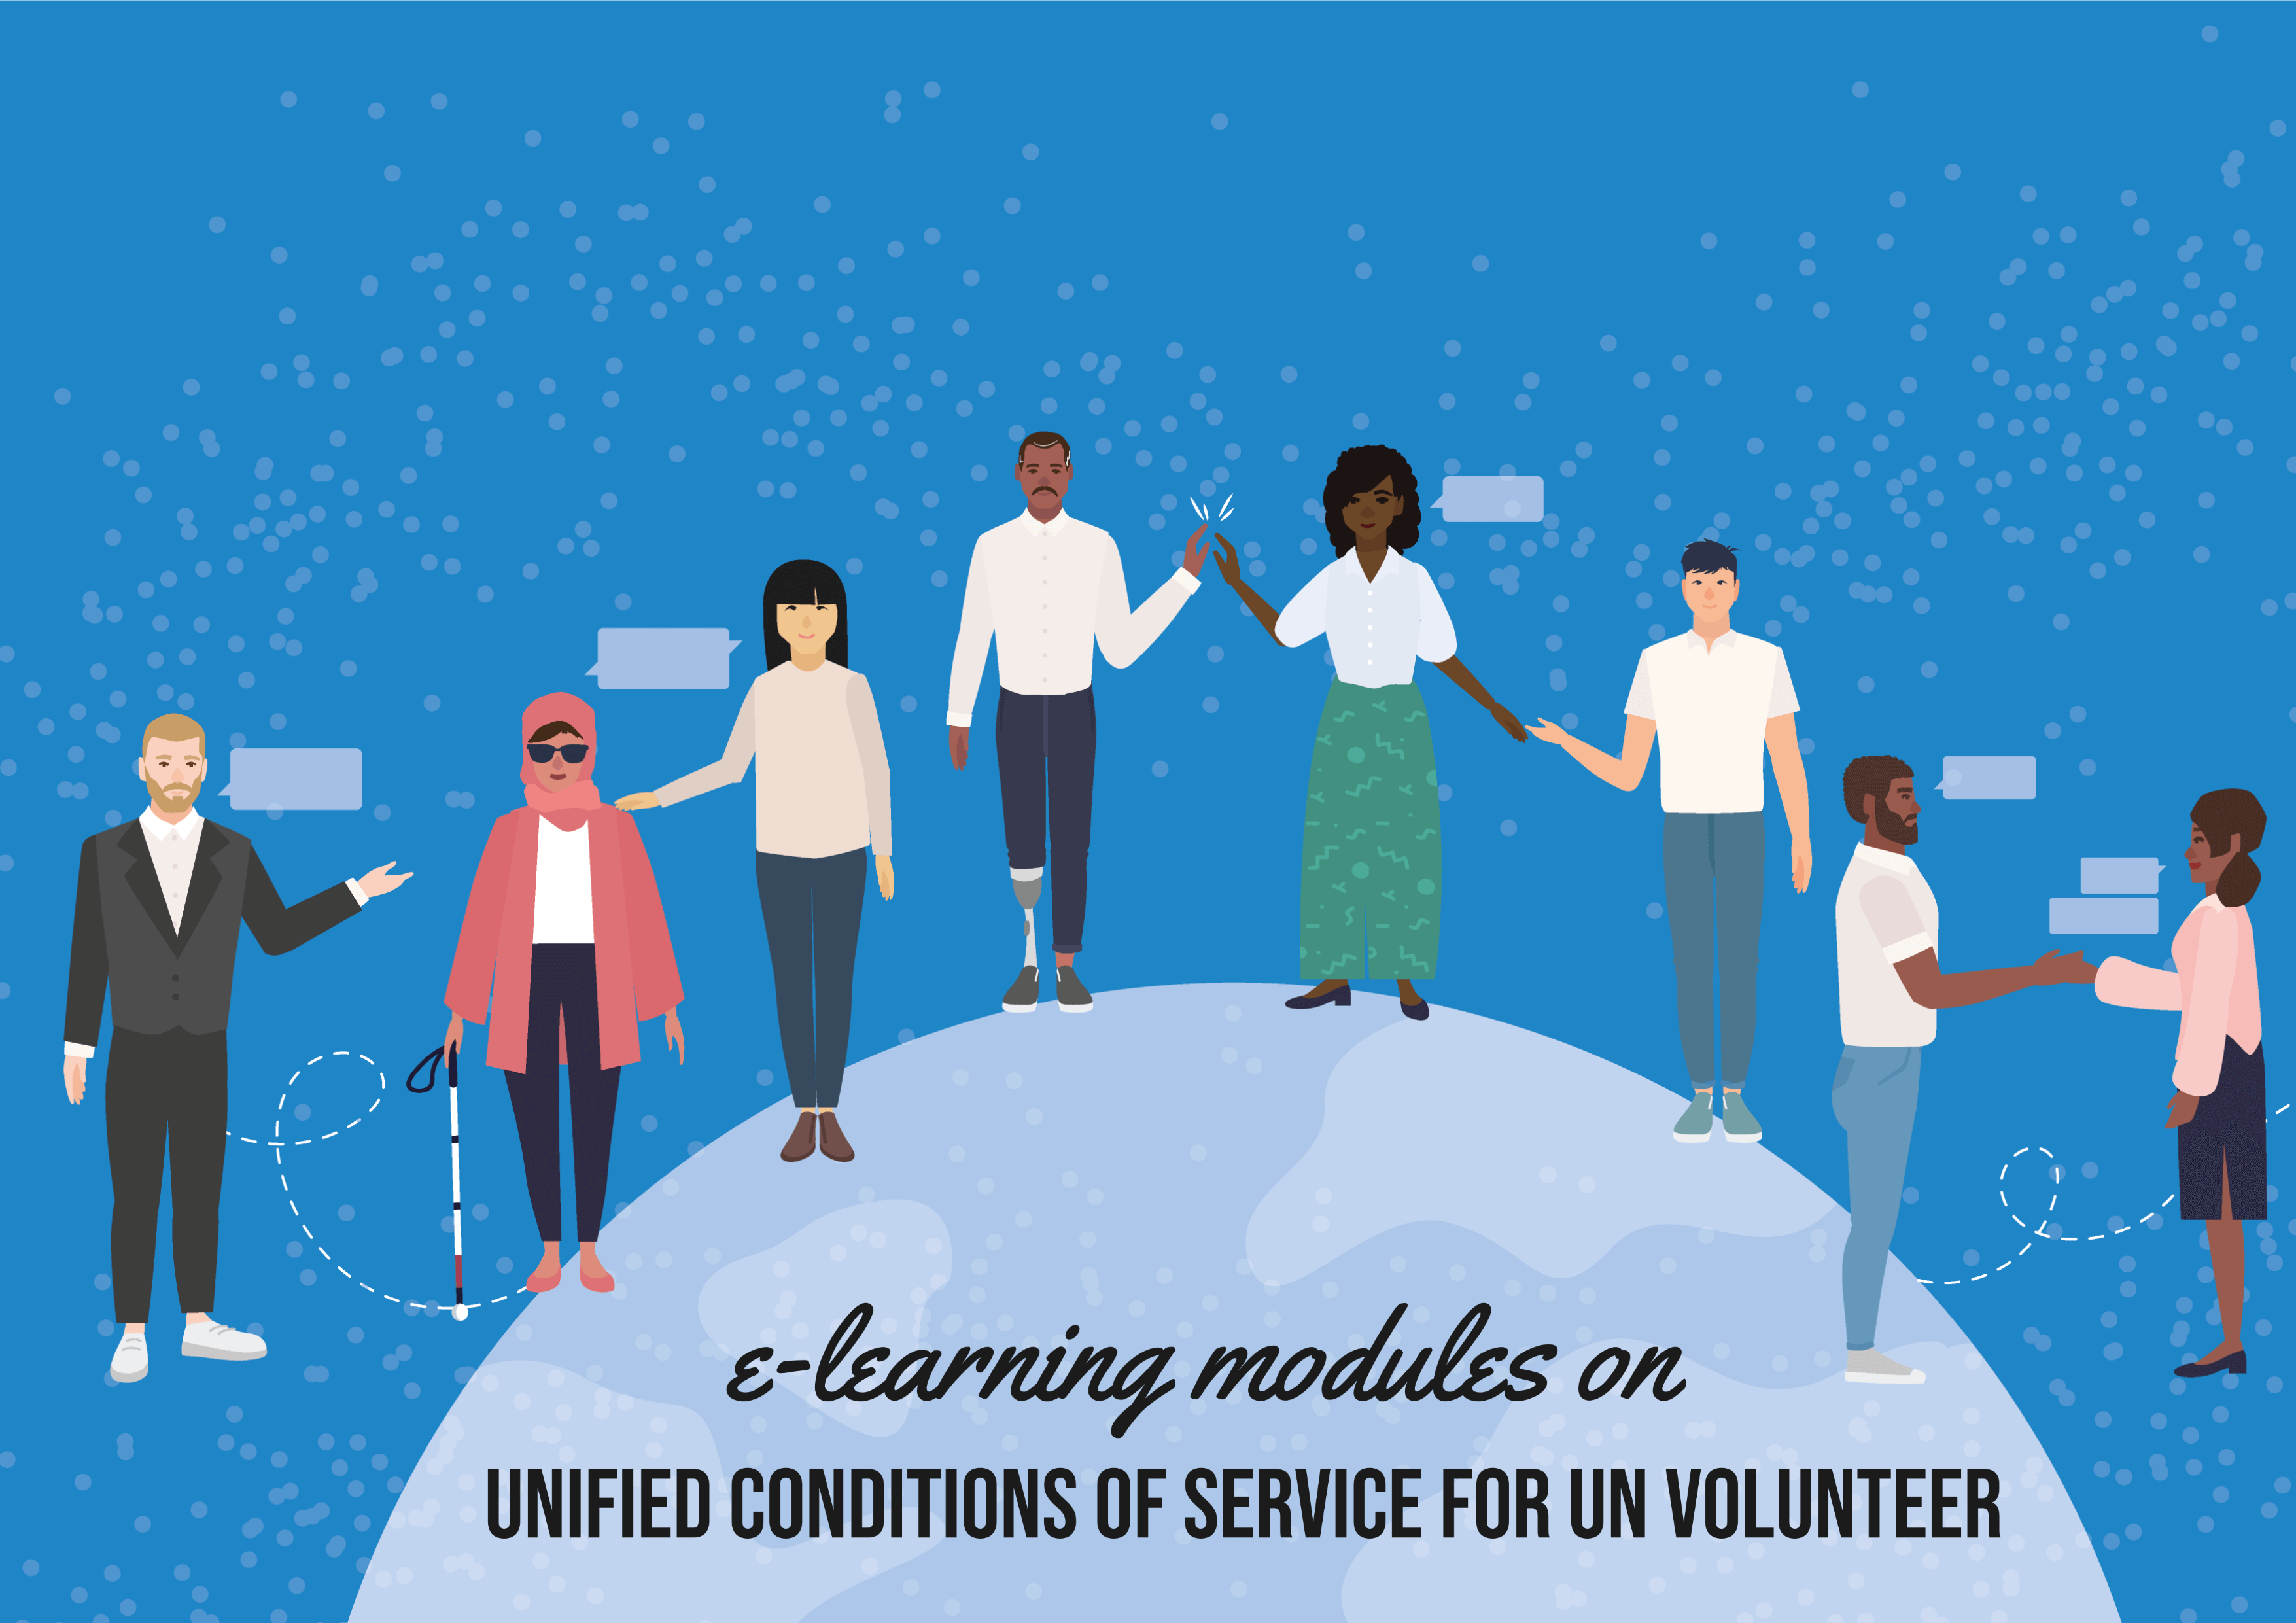 e-learning modules on UNV Conditions of Service